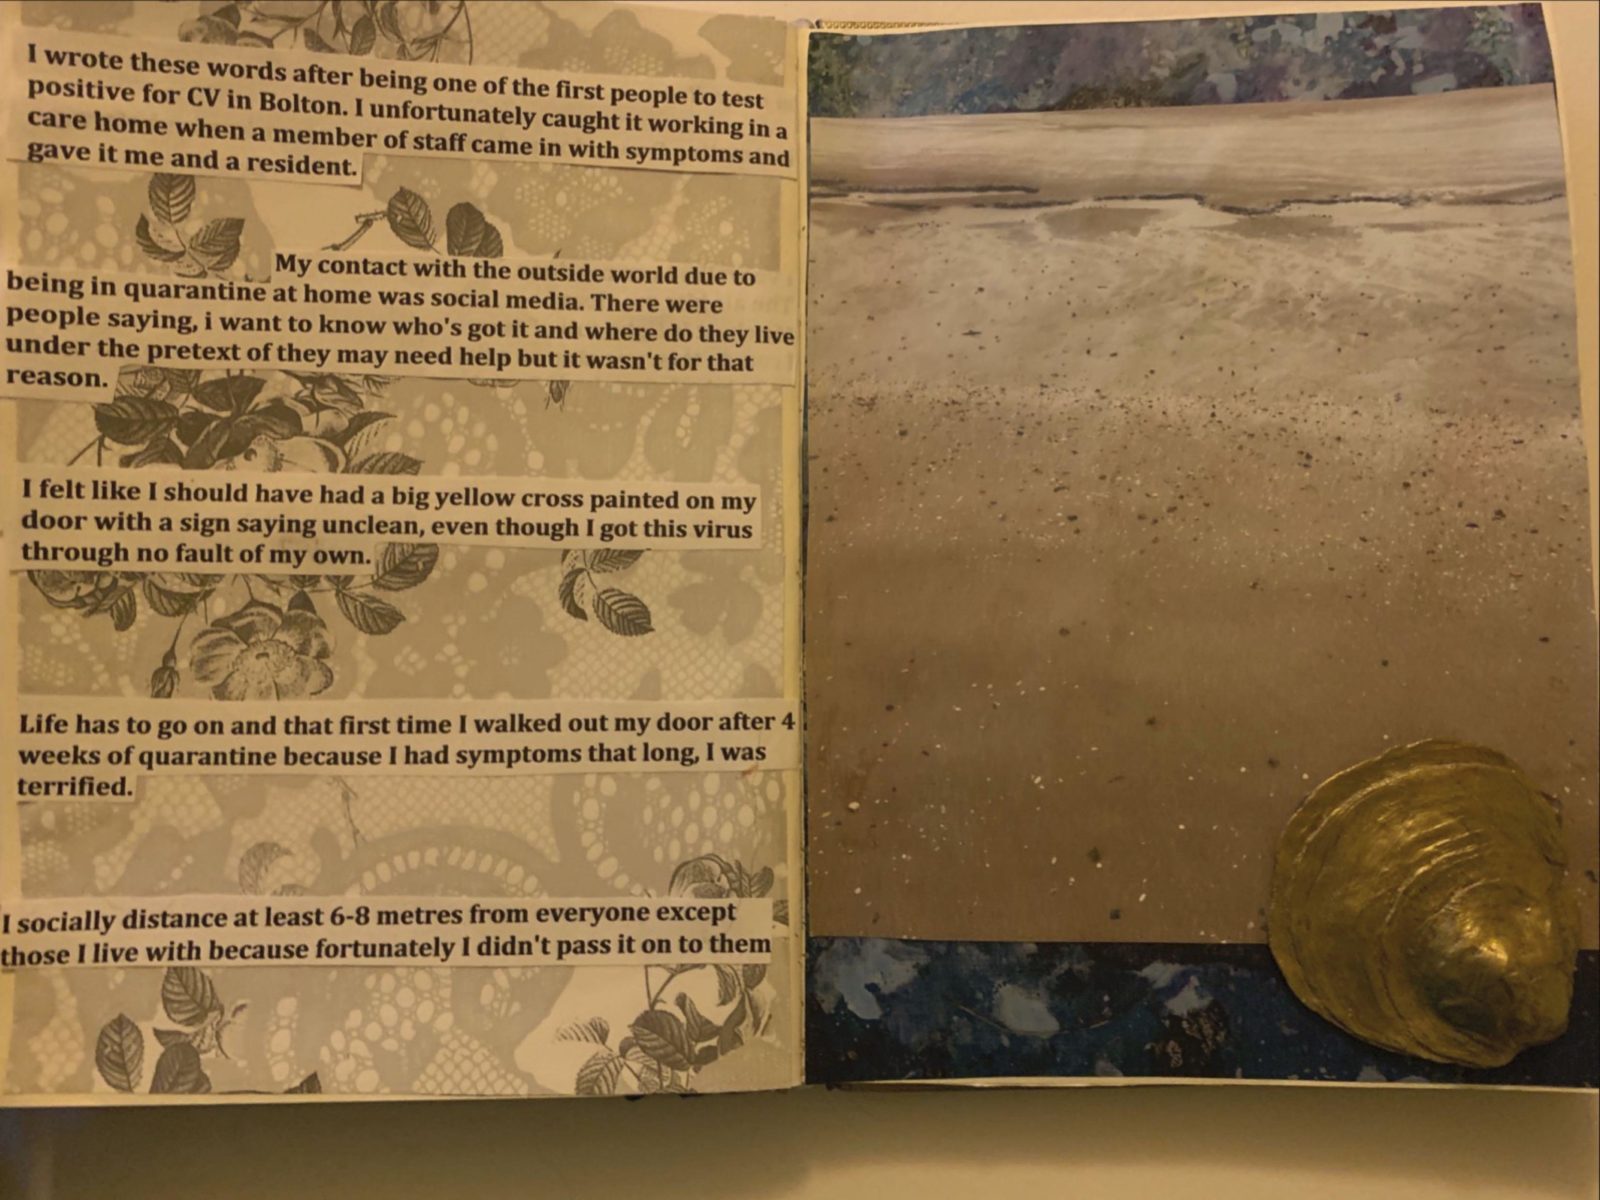 An open sketchbook with printed text cut out and stuck on a lace patterned background on the left page, on the right hand page is a photograph of sand stuck on top of a blue marble background with a small gold sculpture resting on the bottom right hand corner. The text on the left page reads ‘I wrote these words after being one of the first people to test positive for CV in Bolton. I unfortunately caught it working in a care home when a member of staff came in with symptoms and gave it me and a resident. My contact with the outside world due to being in quarantine at home was social media. There were people saying, i want to know who's got it and where do they live under the pretext of they may need help but it wasn't for that reason. I felt like I should have had a big yellow cross painted on my door with a sign saying unclean, even though I got this virus through no fault of my own. Life has to go on and that first time I walked out my door after 4 weeks of quarantine because I had symptoms that long, I was terrified. I socially distance at least 6-8 metres from everyone except those I live with because fortunately I didn't pass it on to them’